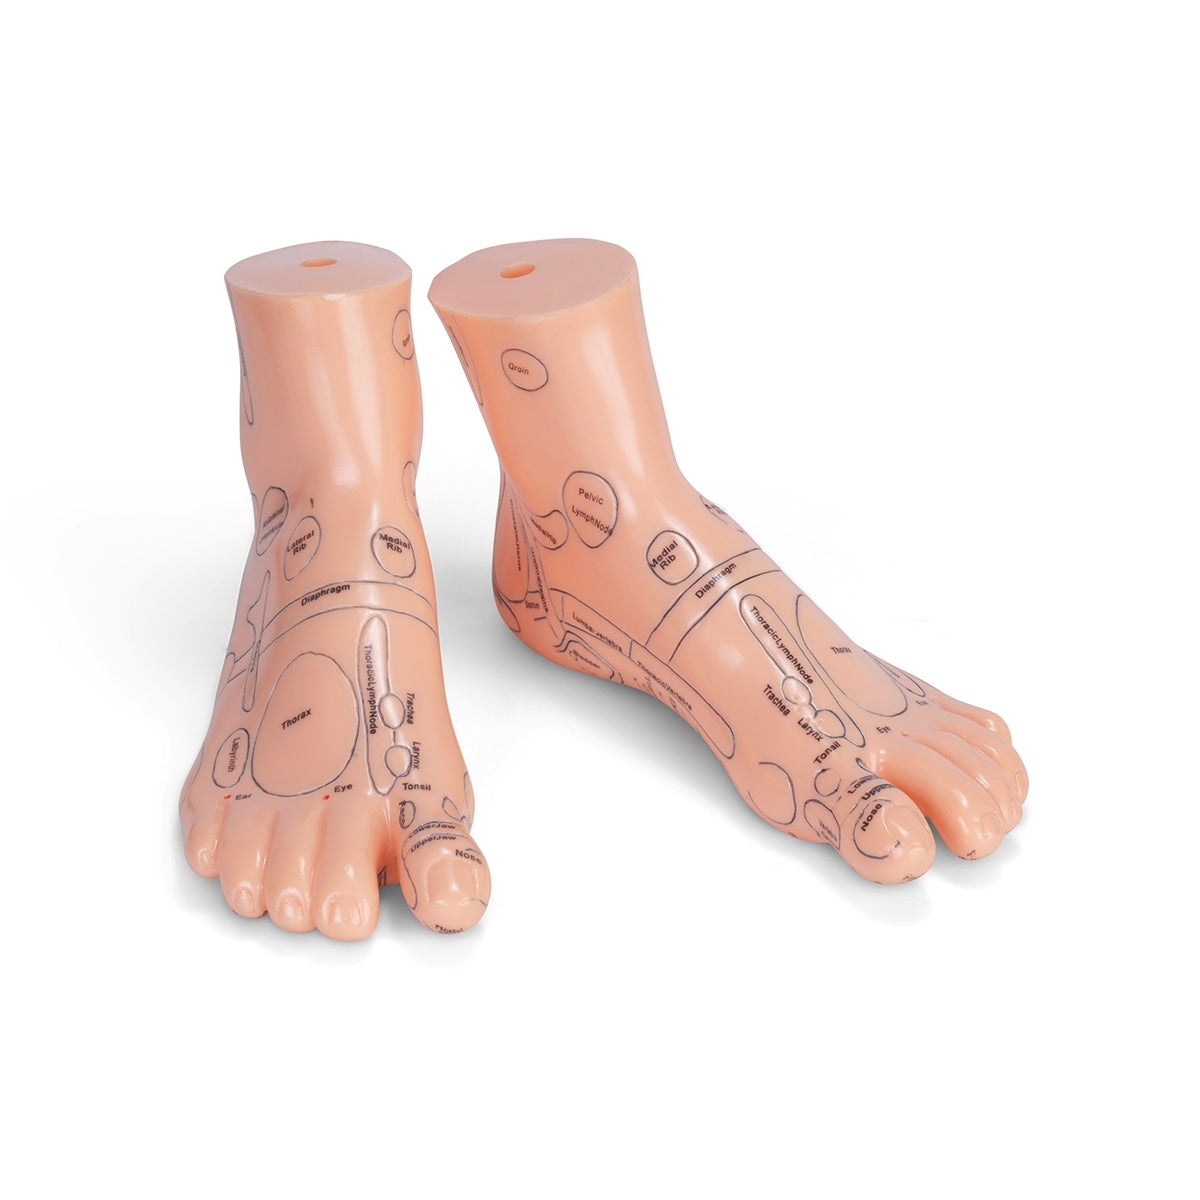 Foot Acupuncture Model Firm